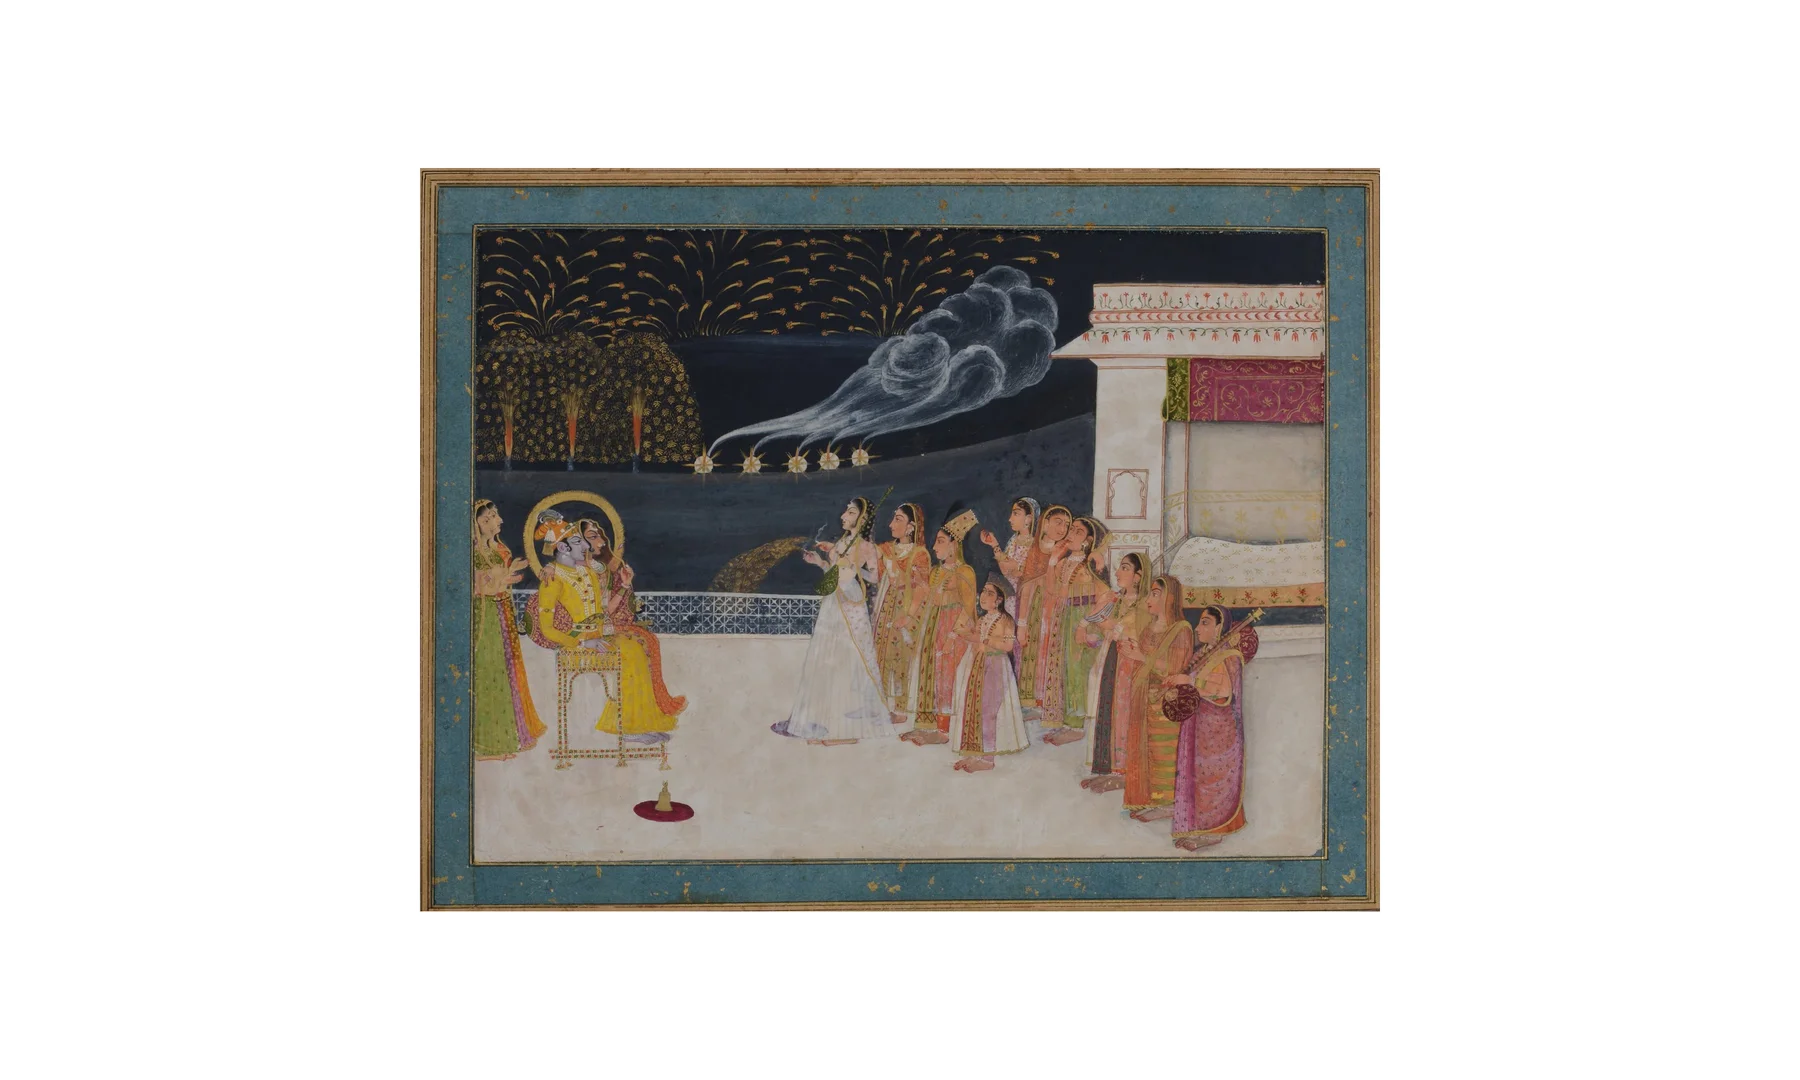 Radha and Krishna Watching Fireworks in the Sky from the collection of National Museum, New Delhi